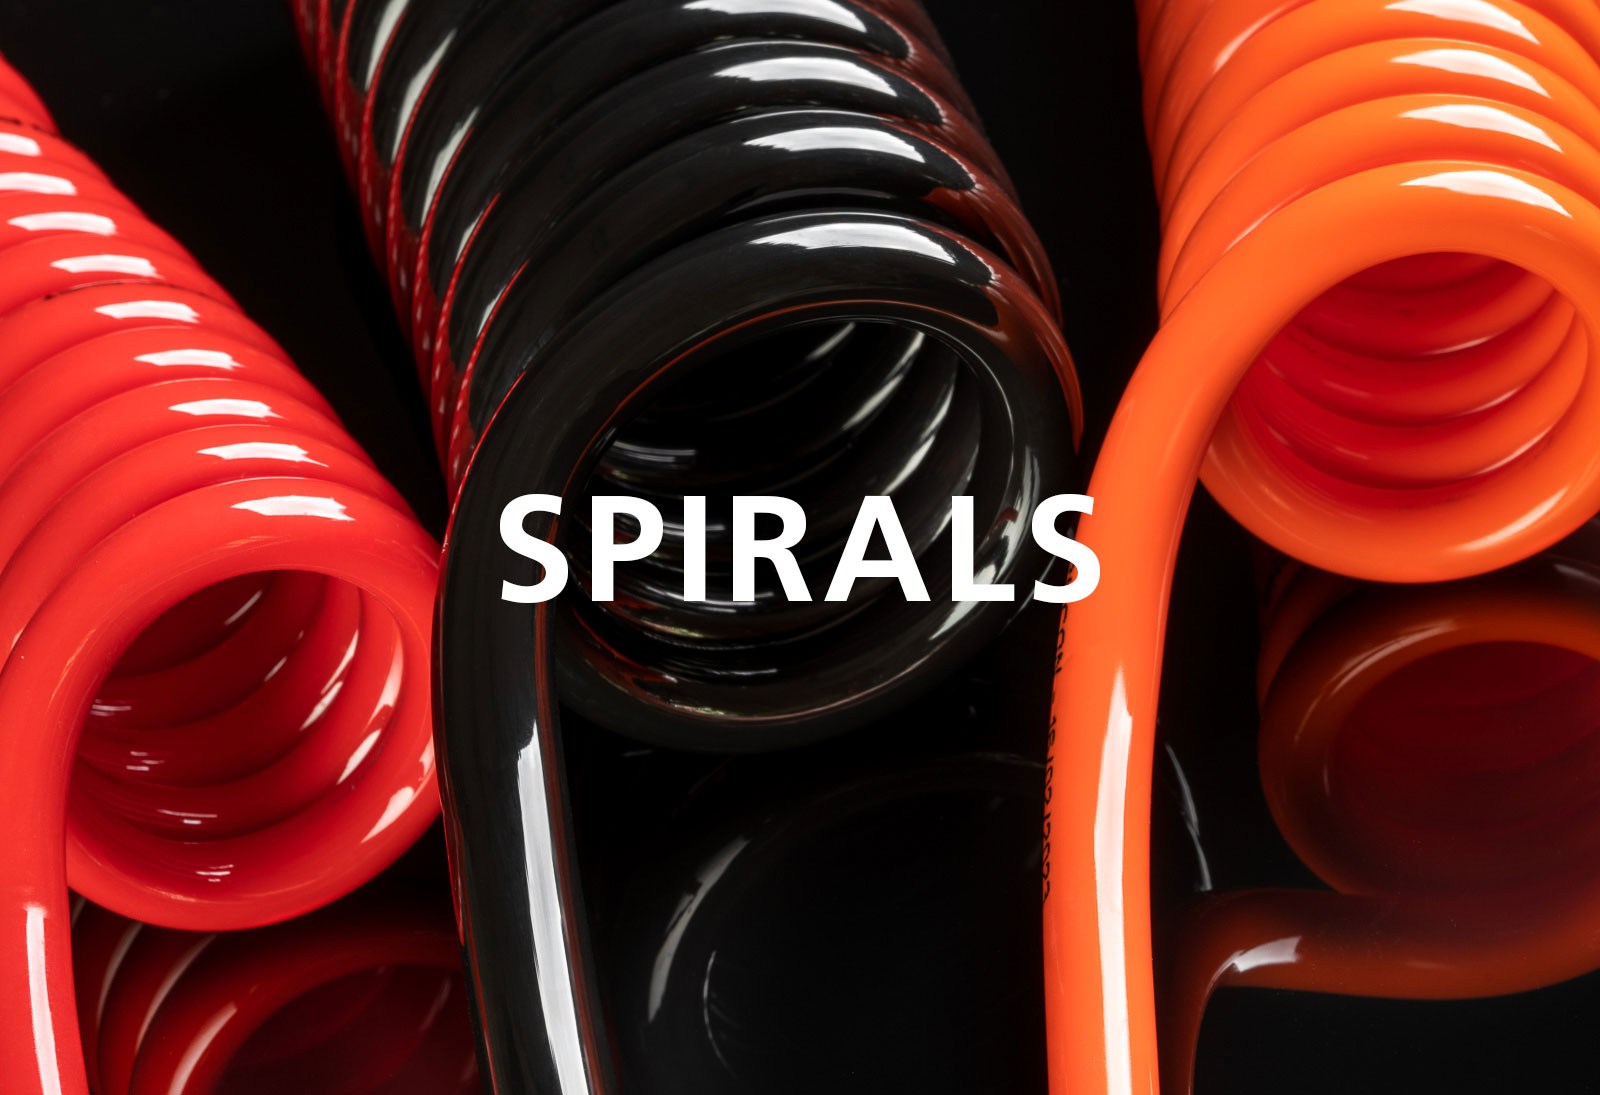 Production of plastic spirals